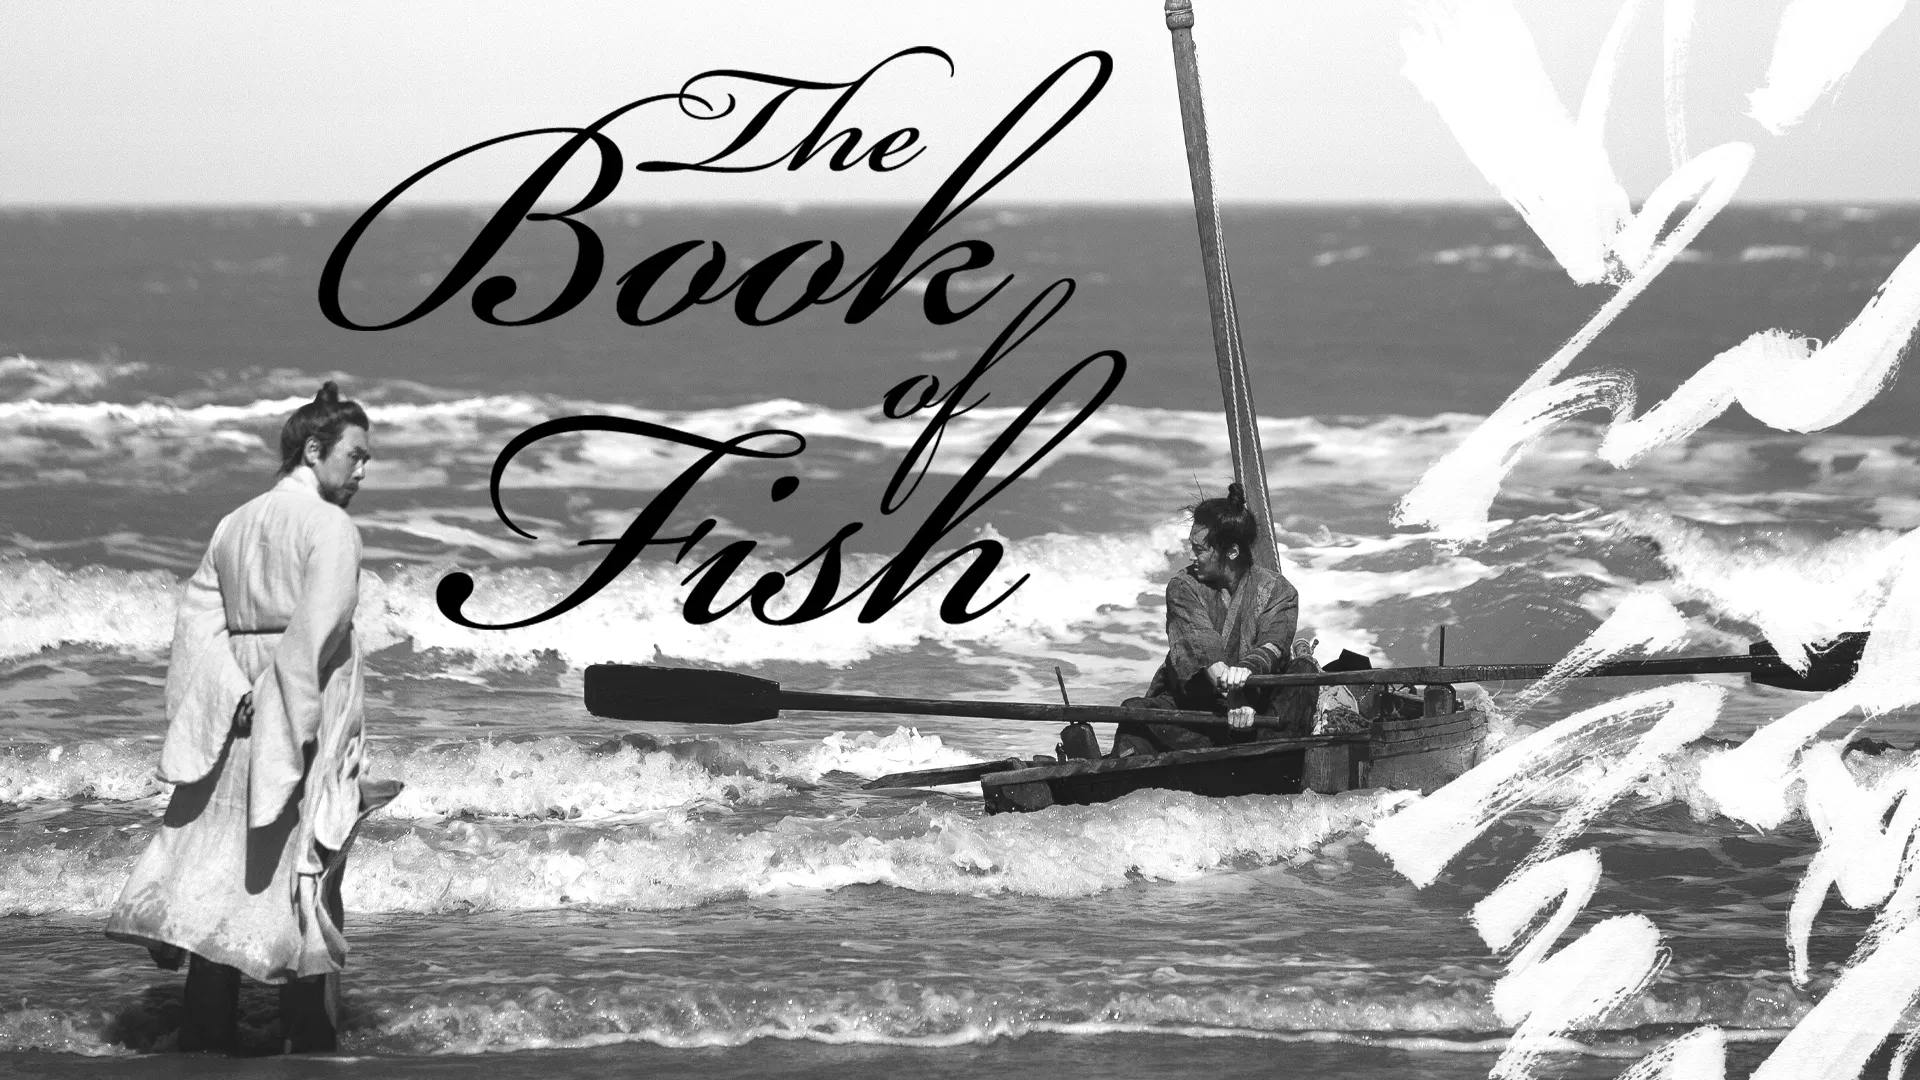 The Book of Fish